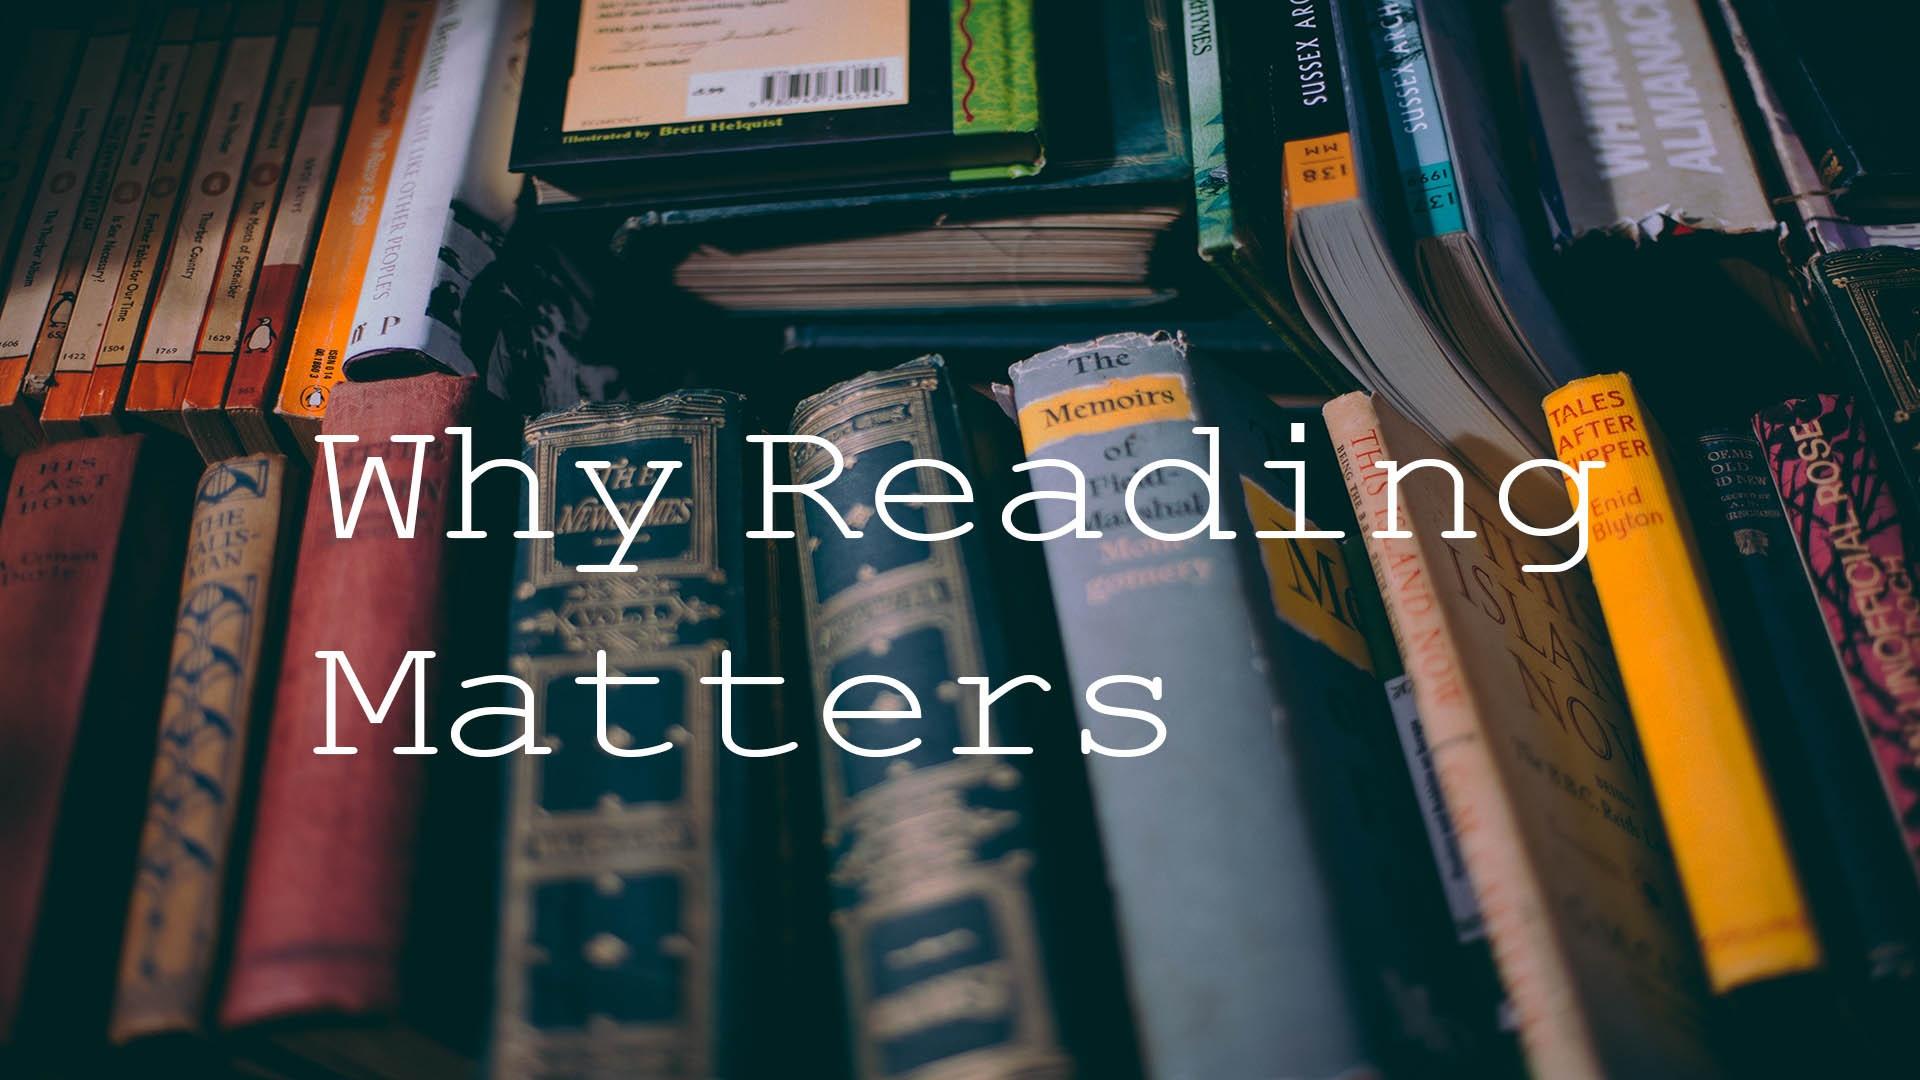 why reading matters essay